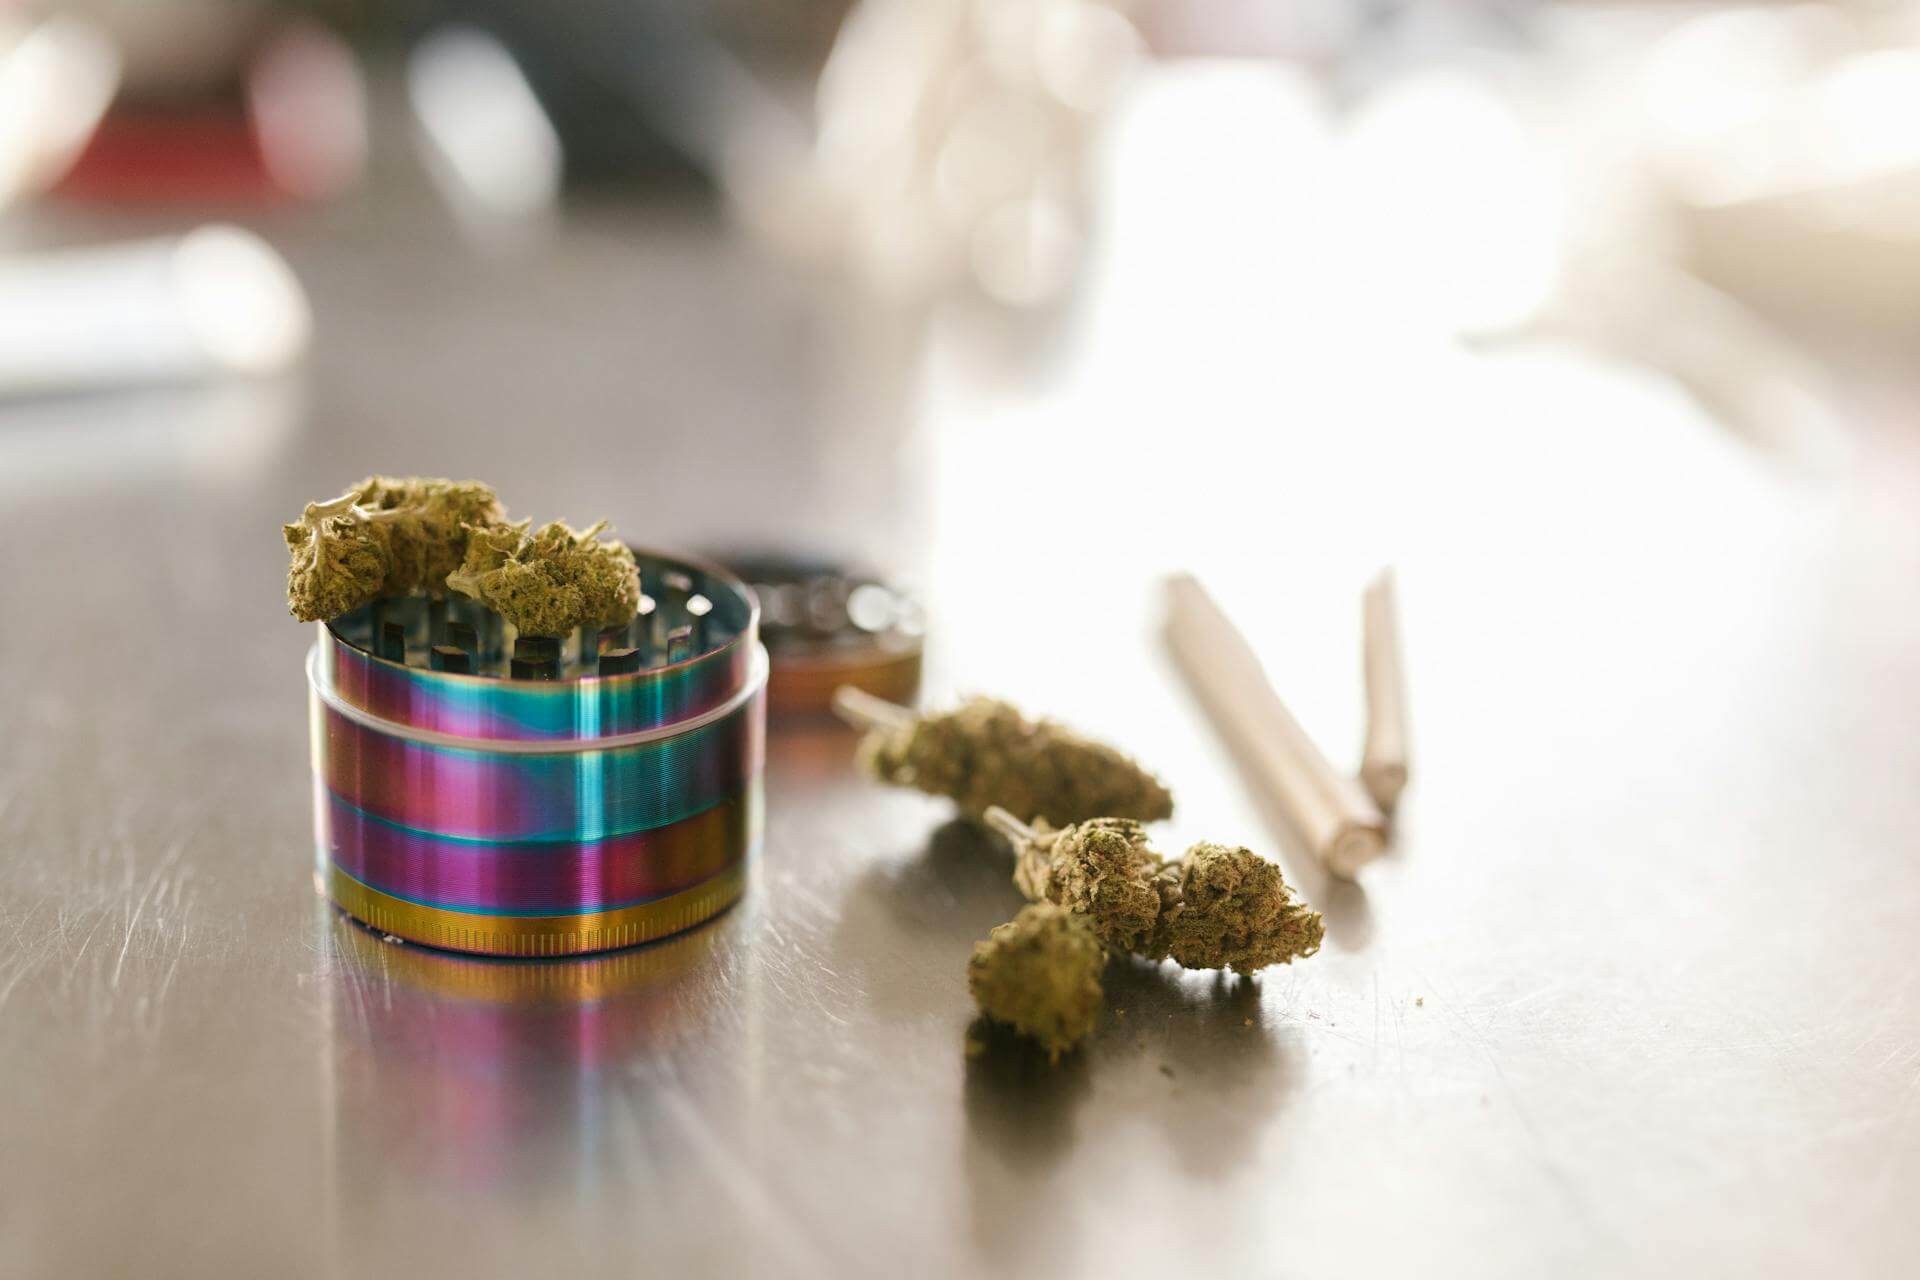 Grinder for cannabis to pack a bowl